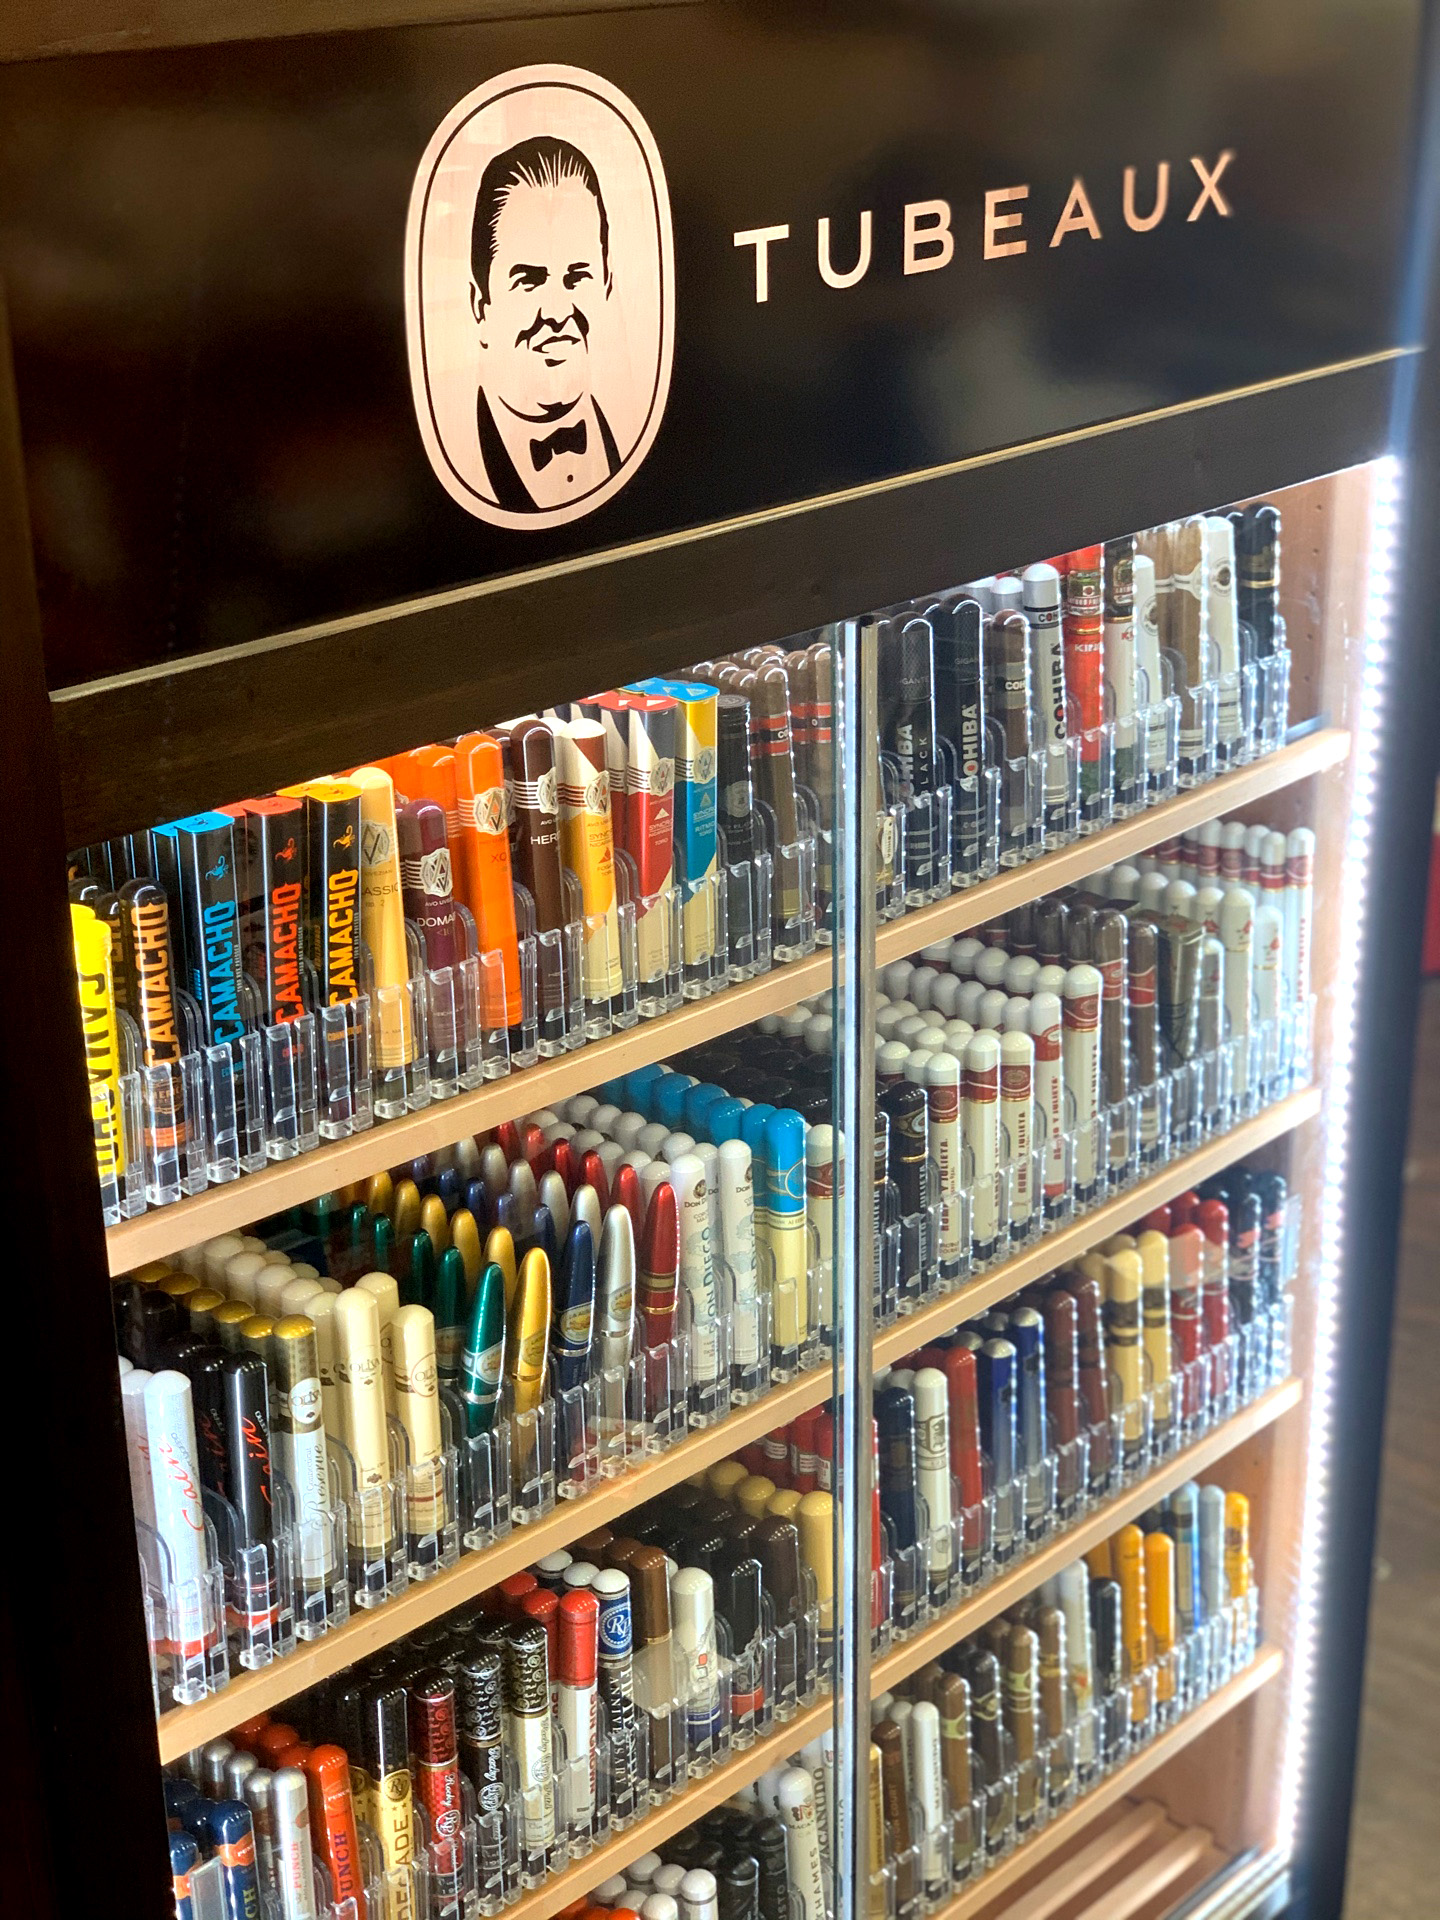 The Tubeaux humidor/kiosk premium cigar program is ideally suited for tobacco products wholesalers and distributors, supply chain providers and retail establishments.